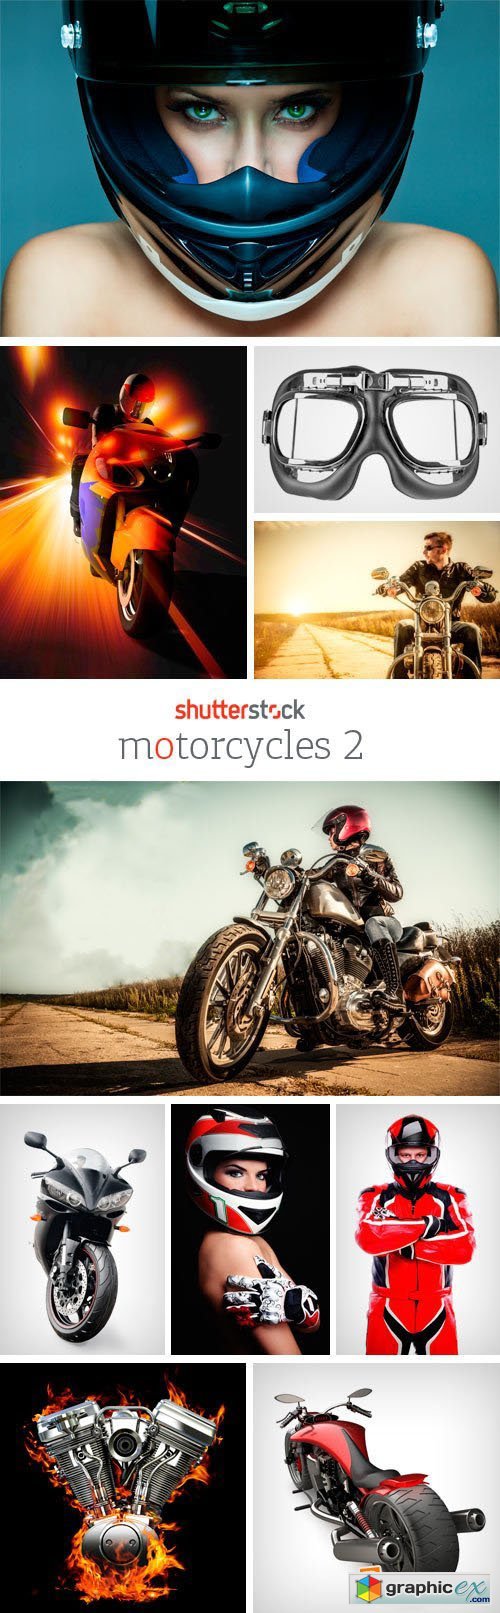 Amazing SS - Motorcycles 2, 25xJPGs